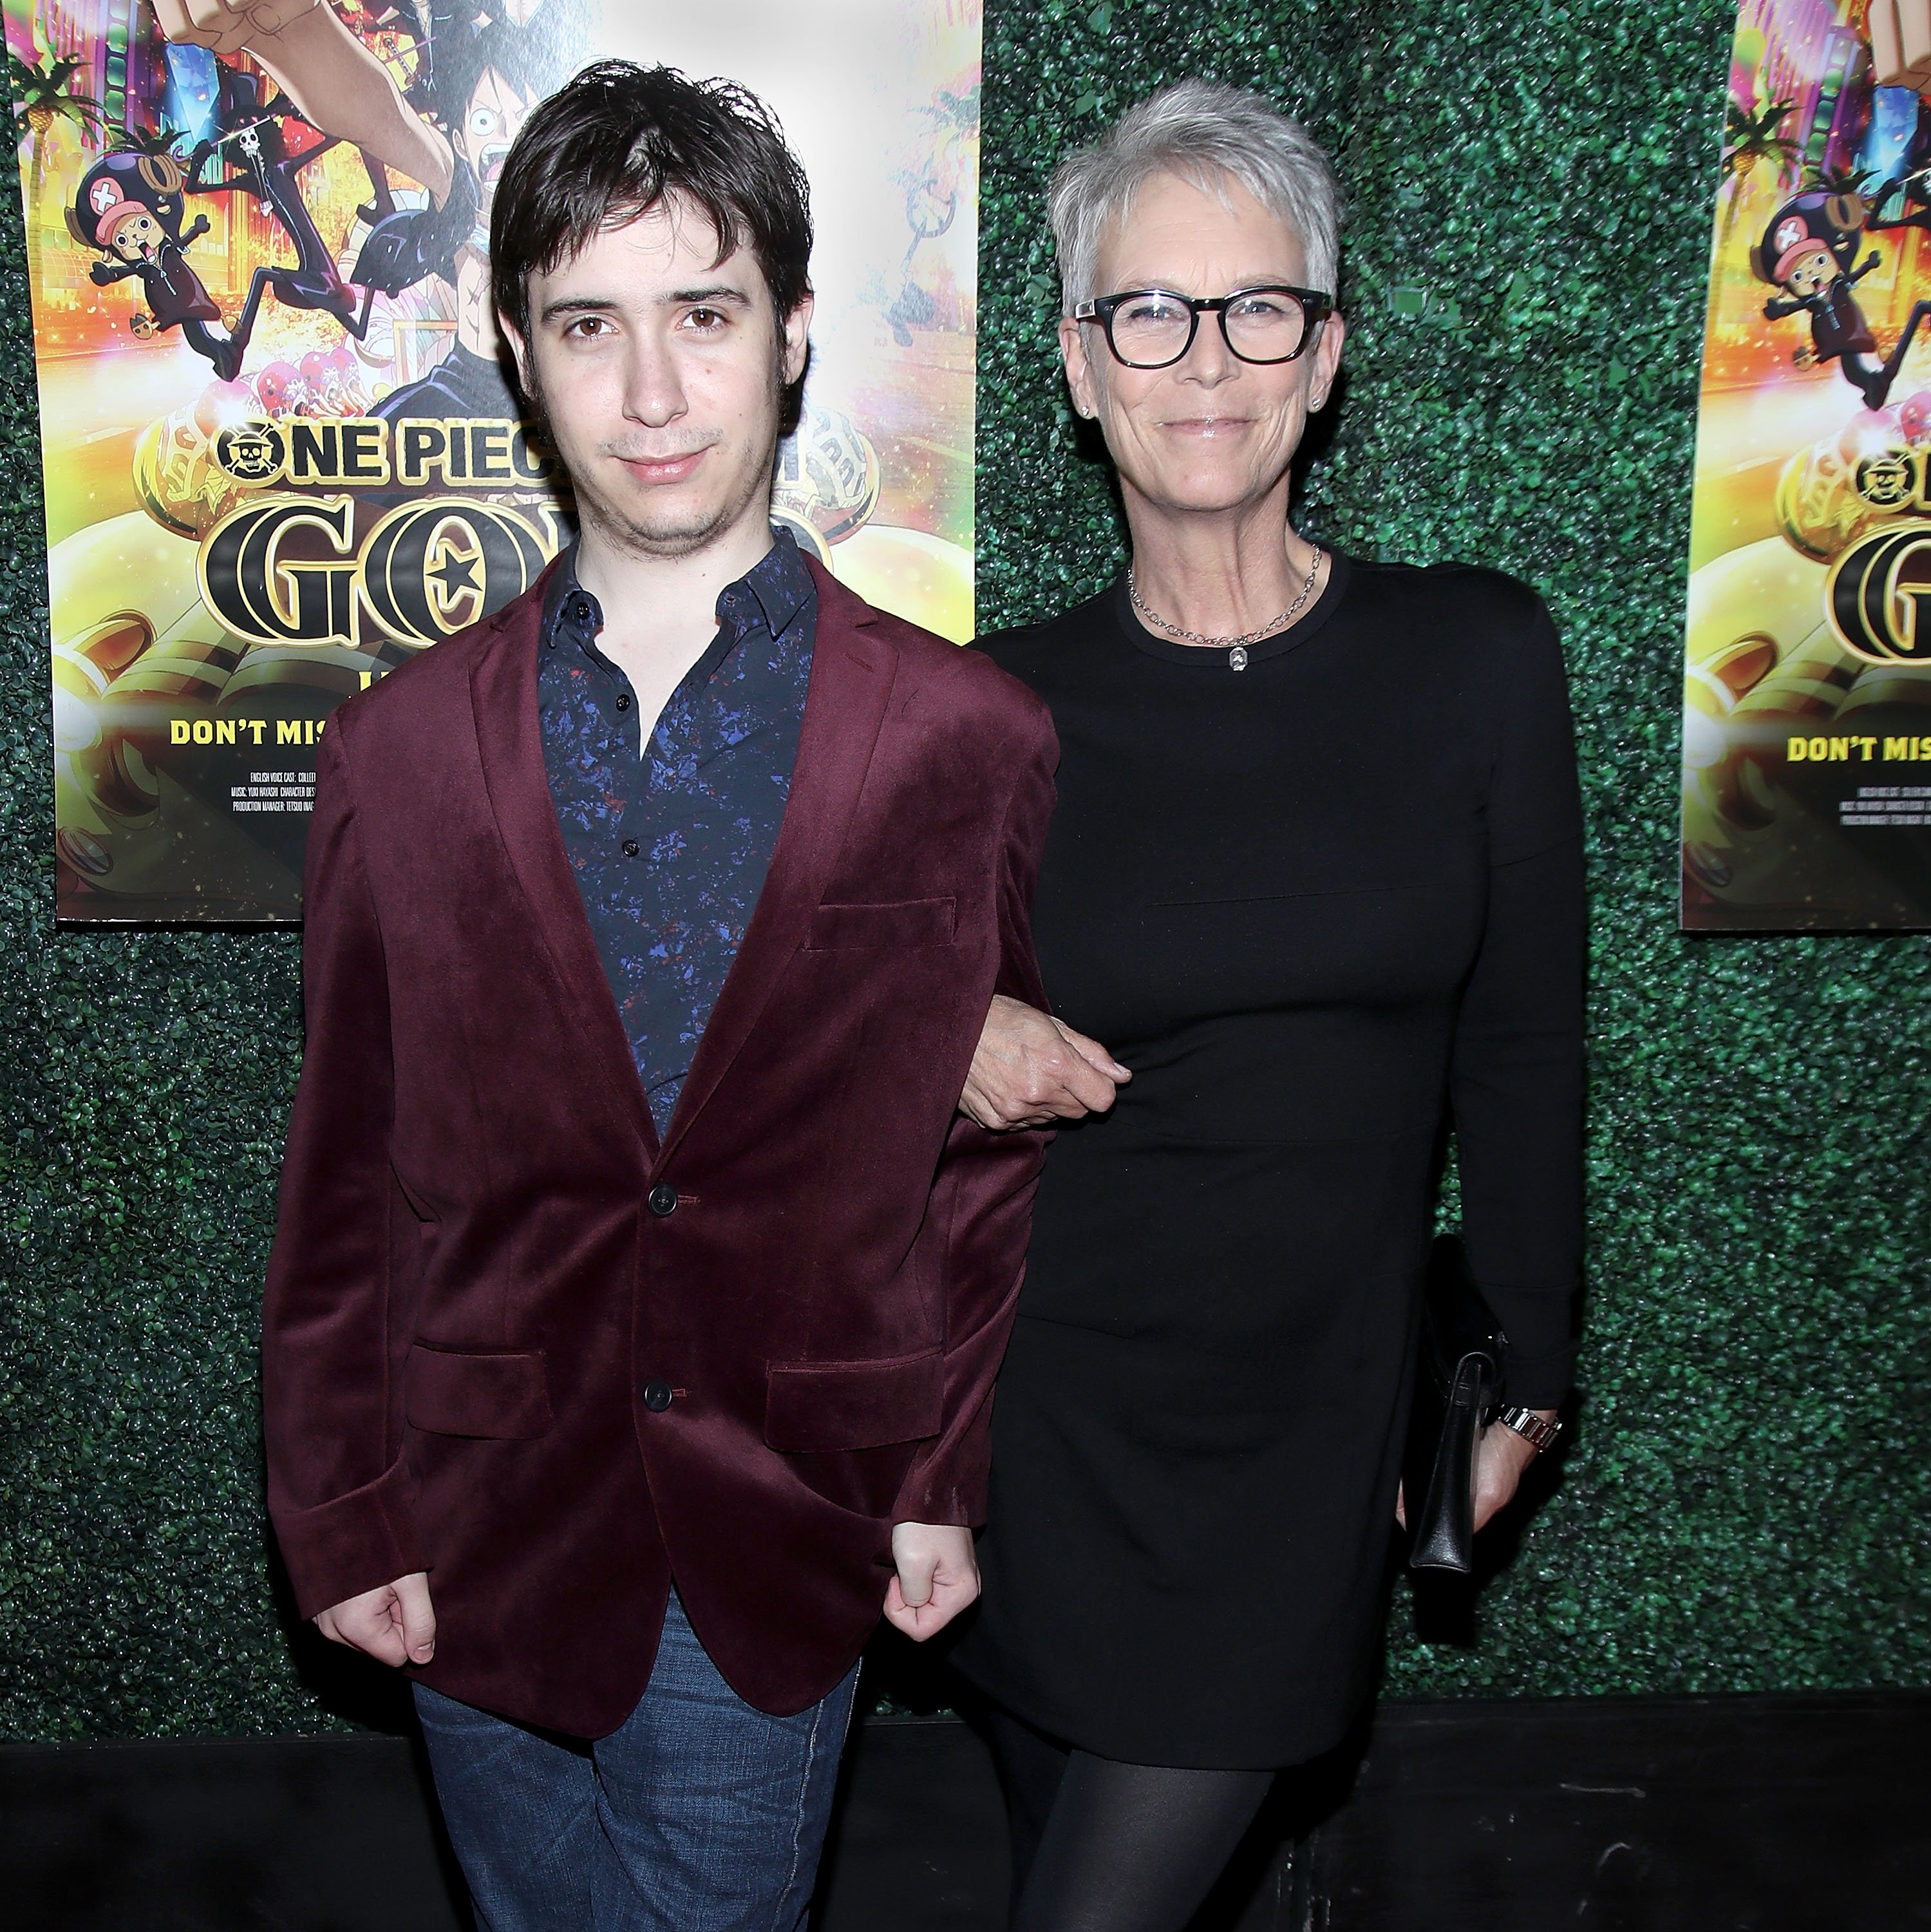 Thomas Guest and Jamie Lee Curtis at the theatrical premiere of "One Piece Film: Gold" on January 5, 2017, in West Hollywood, California | Source: Getty Images